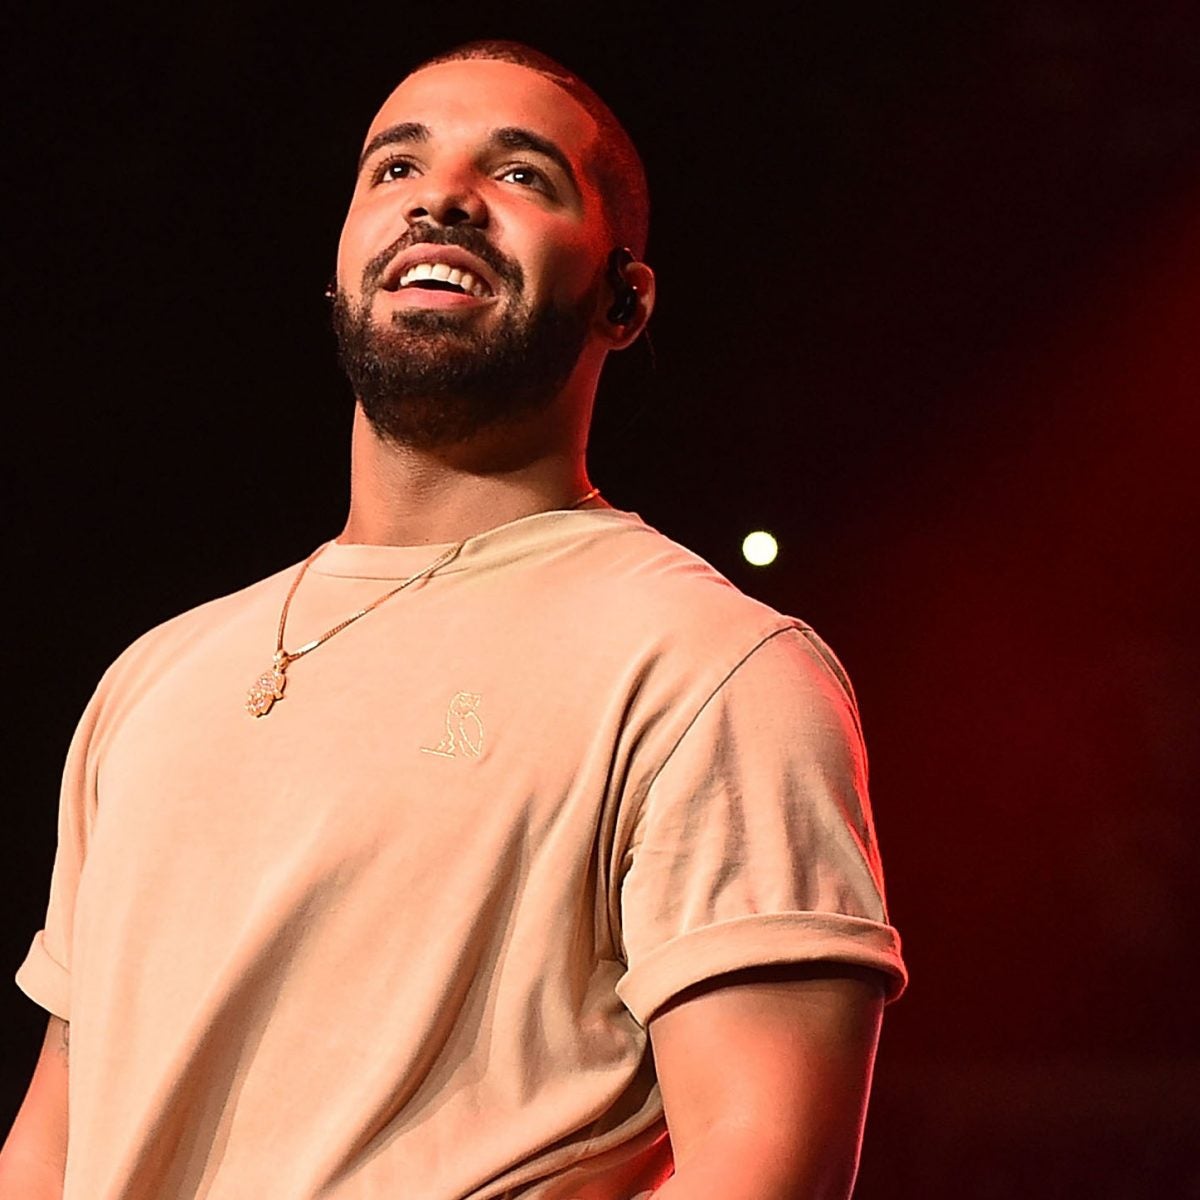 Drake Shares The First Photo Of His Son Adonis And Melts Hearts Everywhere